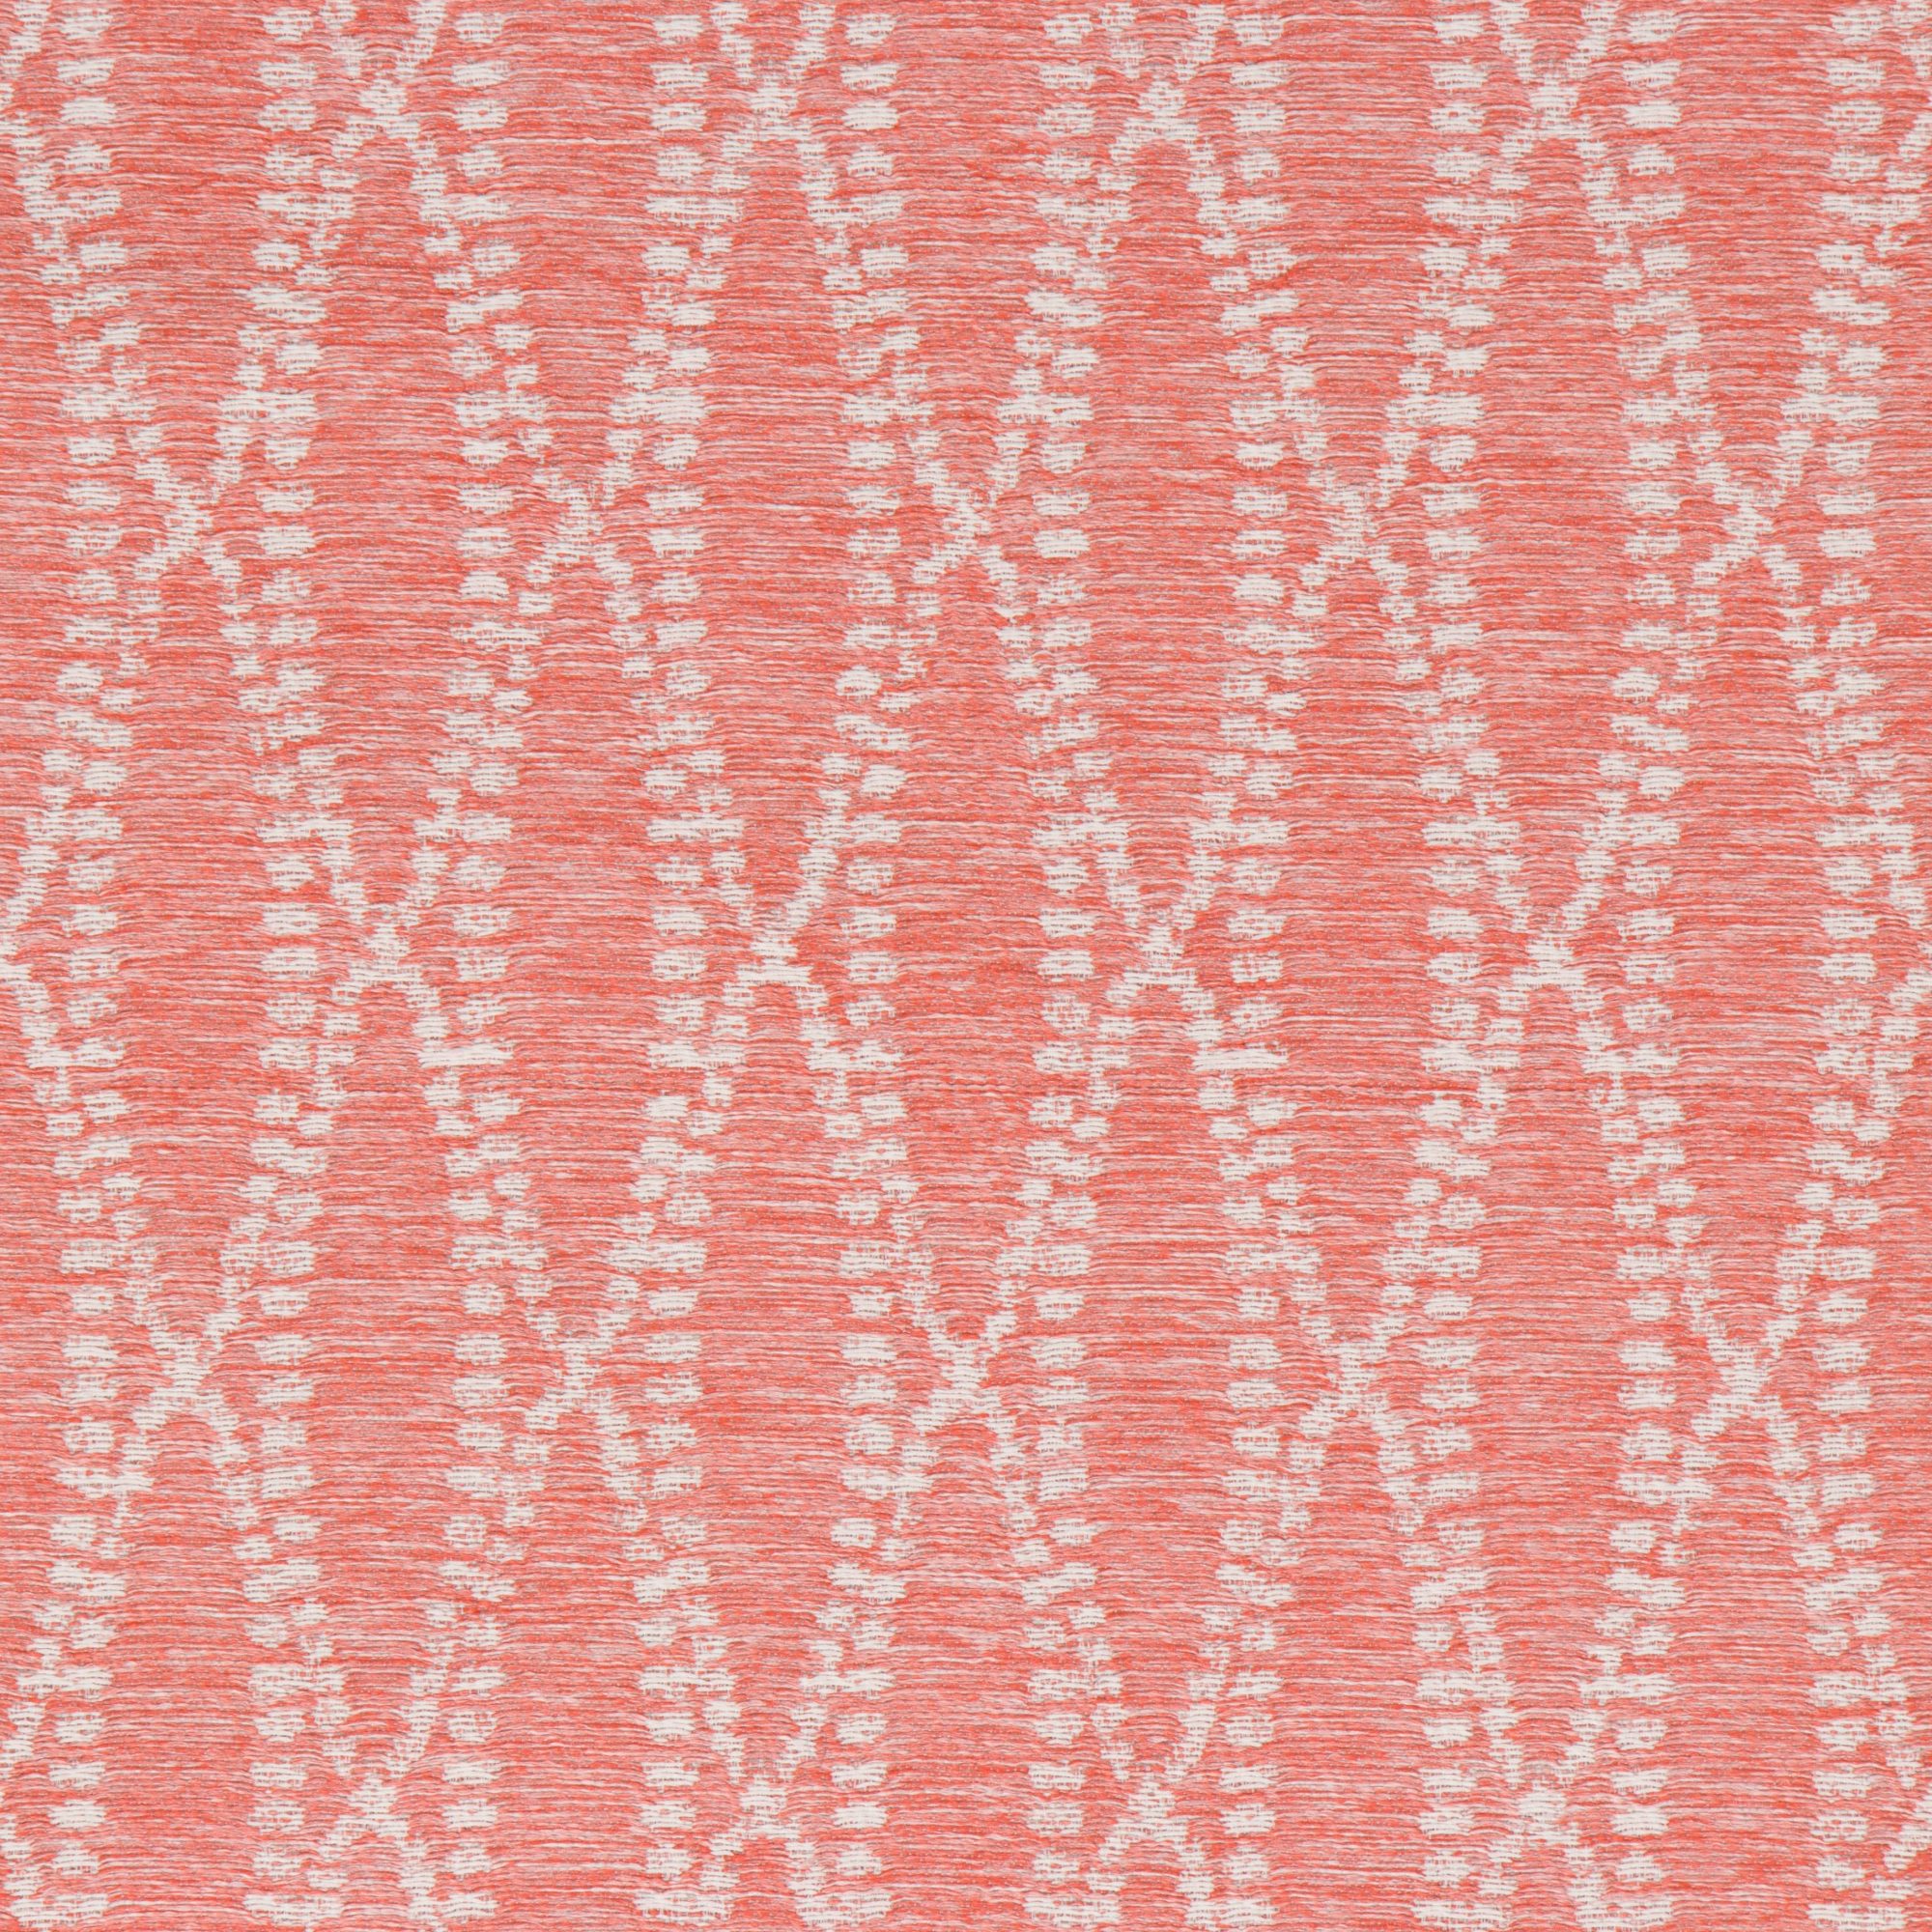 Fabric from Bella Dura and Bella Dura Home in the Camber pattern and Coral color.